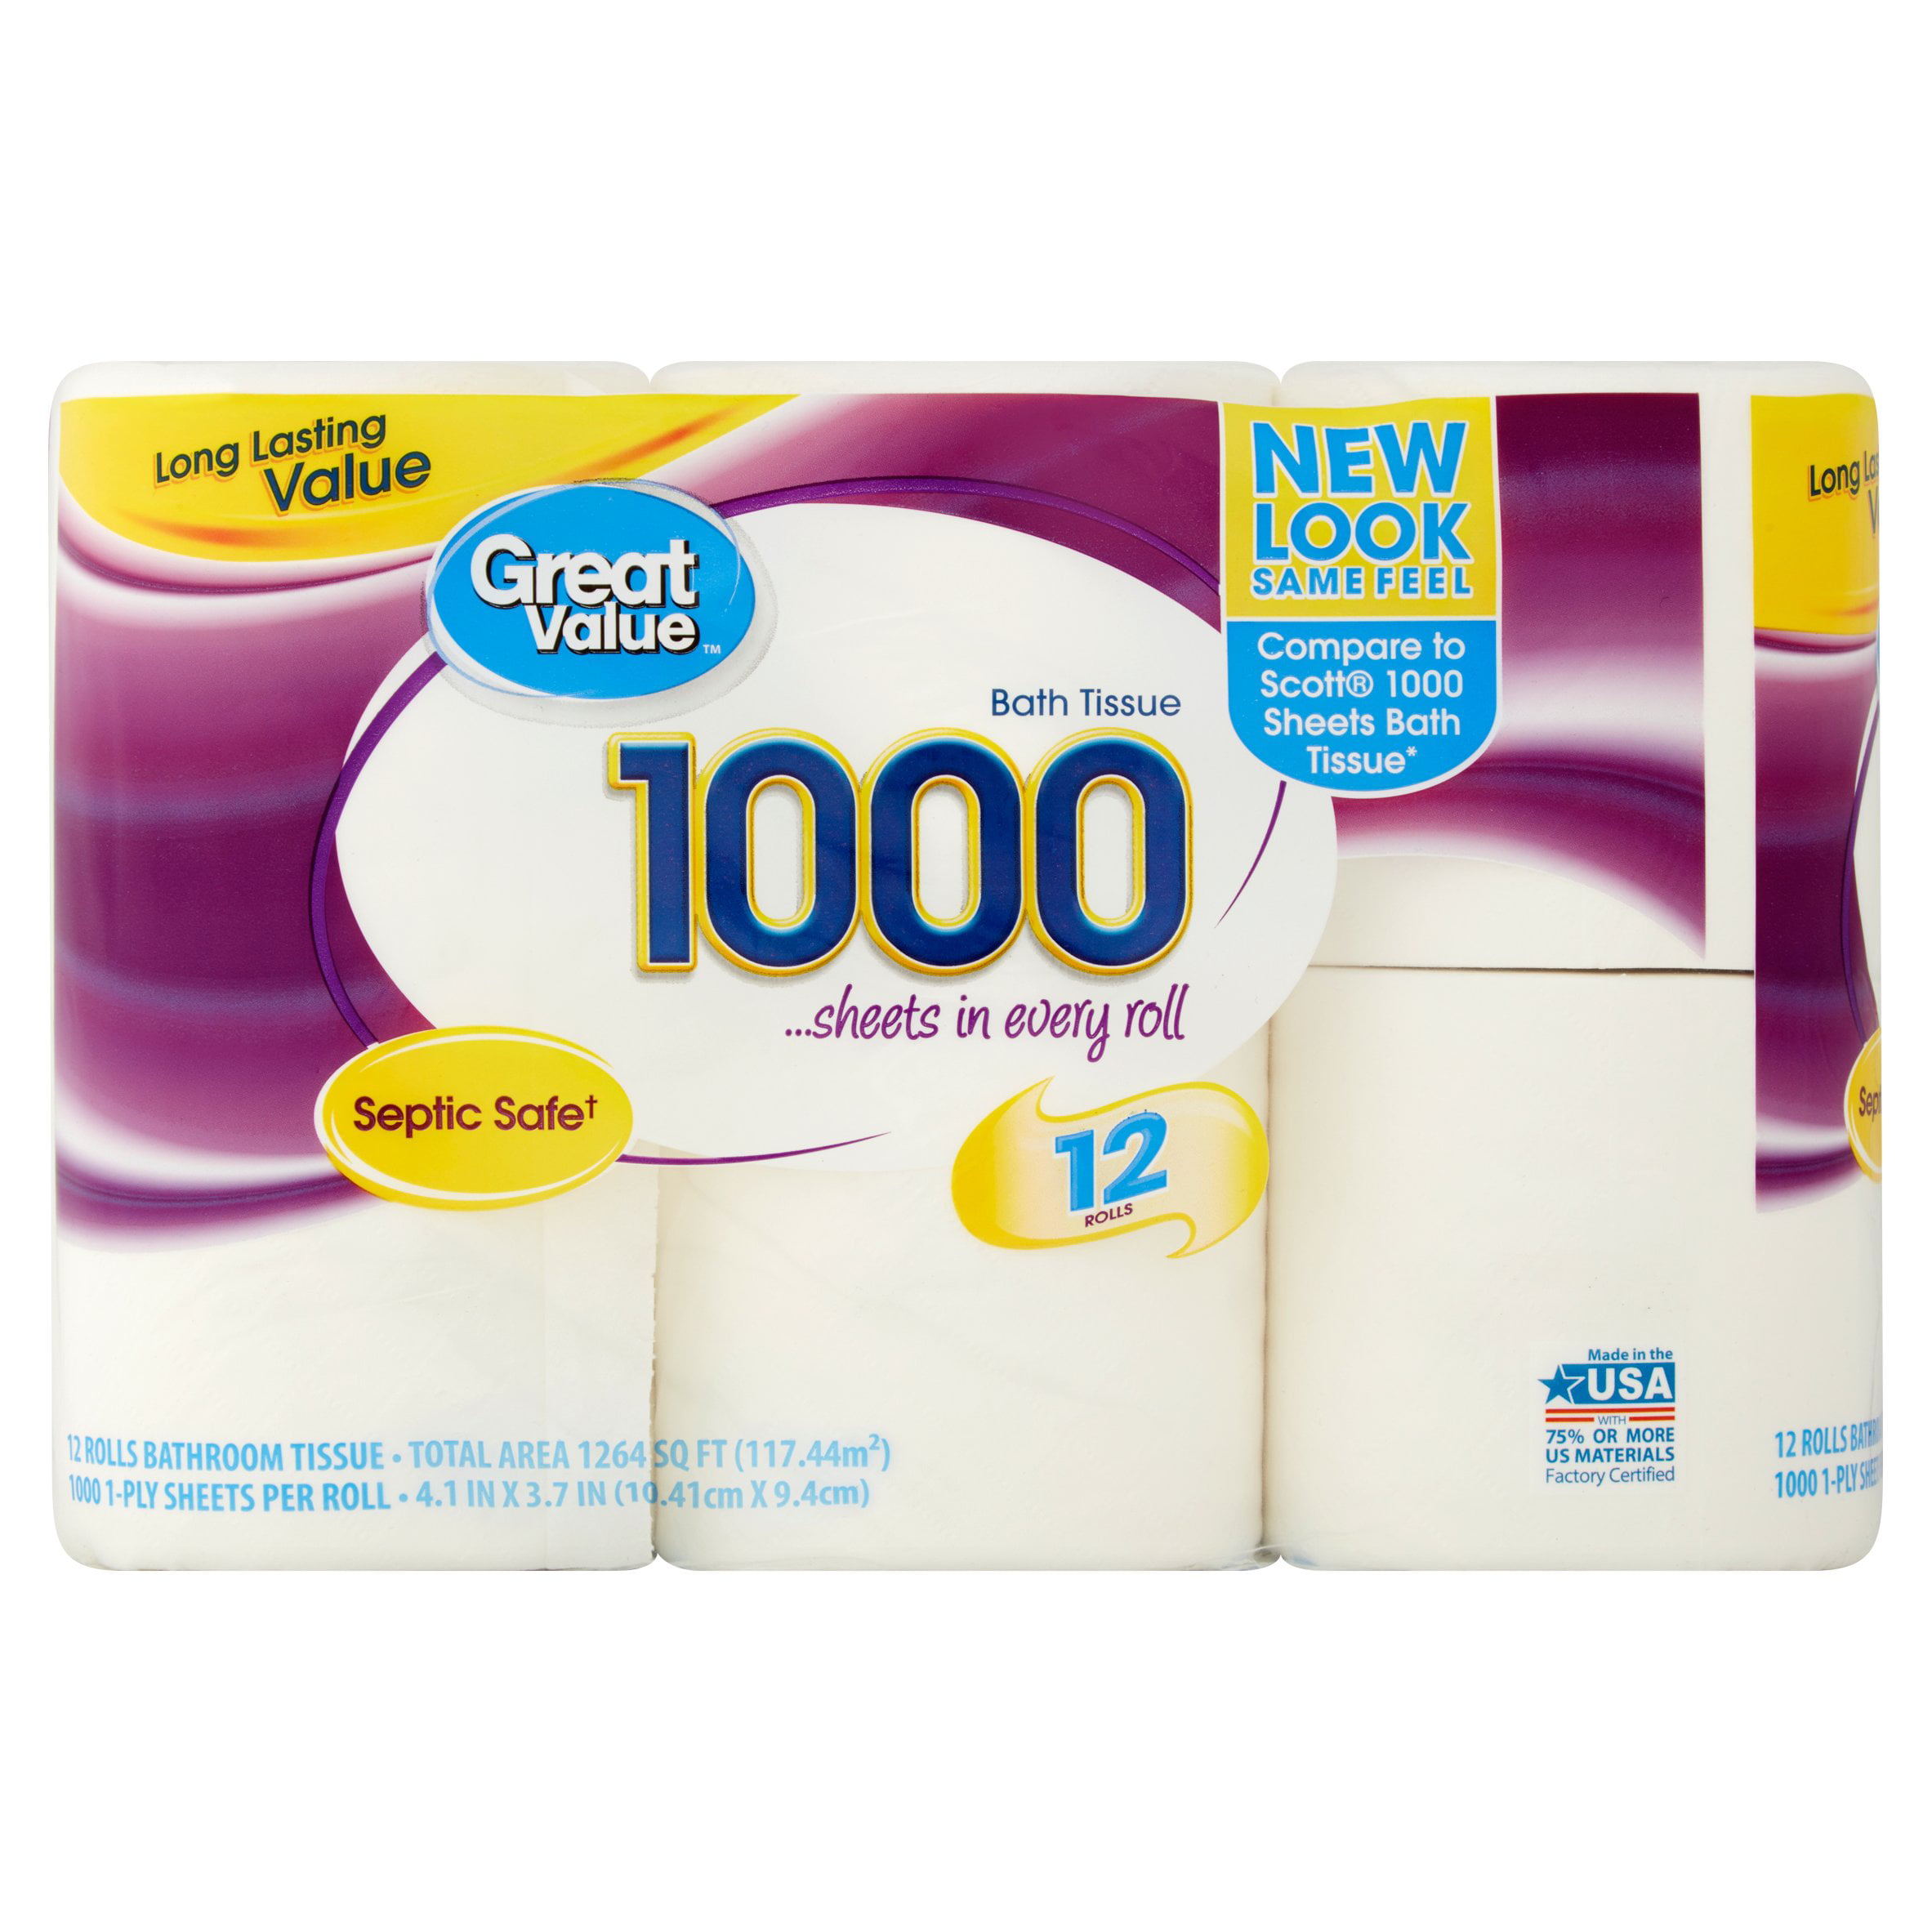 Great Value 1000 Sheets Toilet Paper, 12 Rolls – Walmart Inventory ...